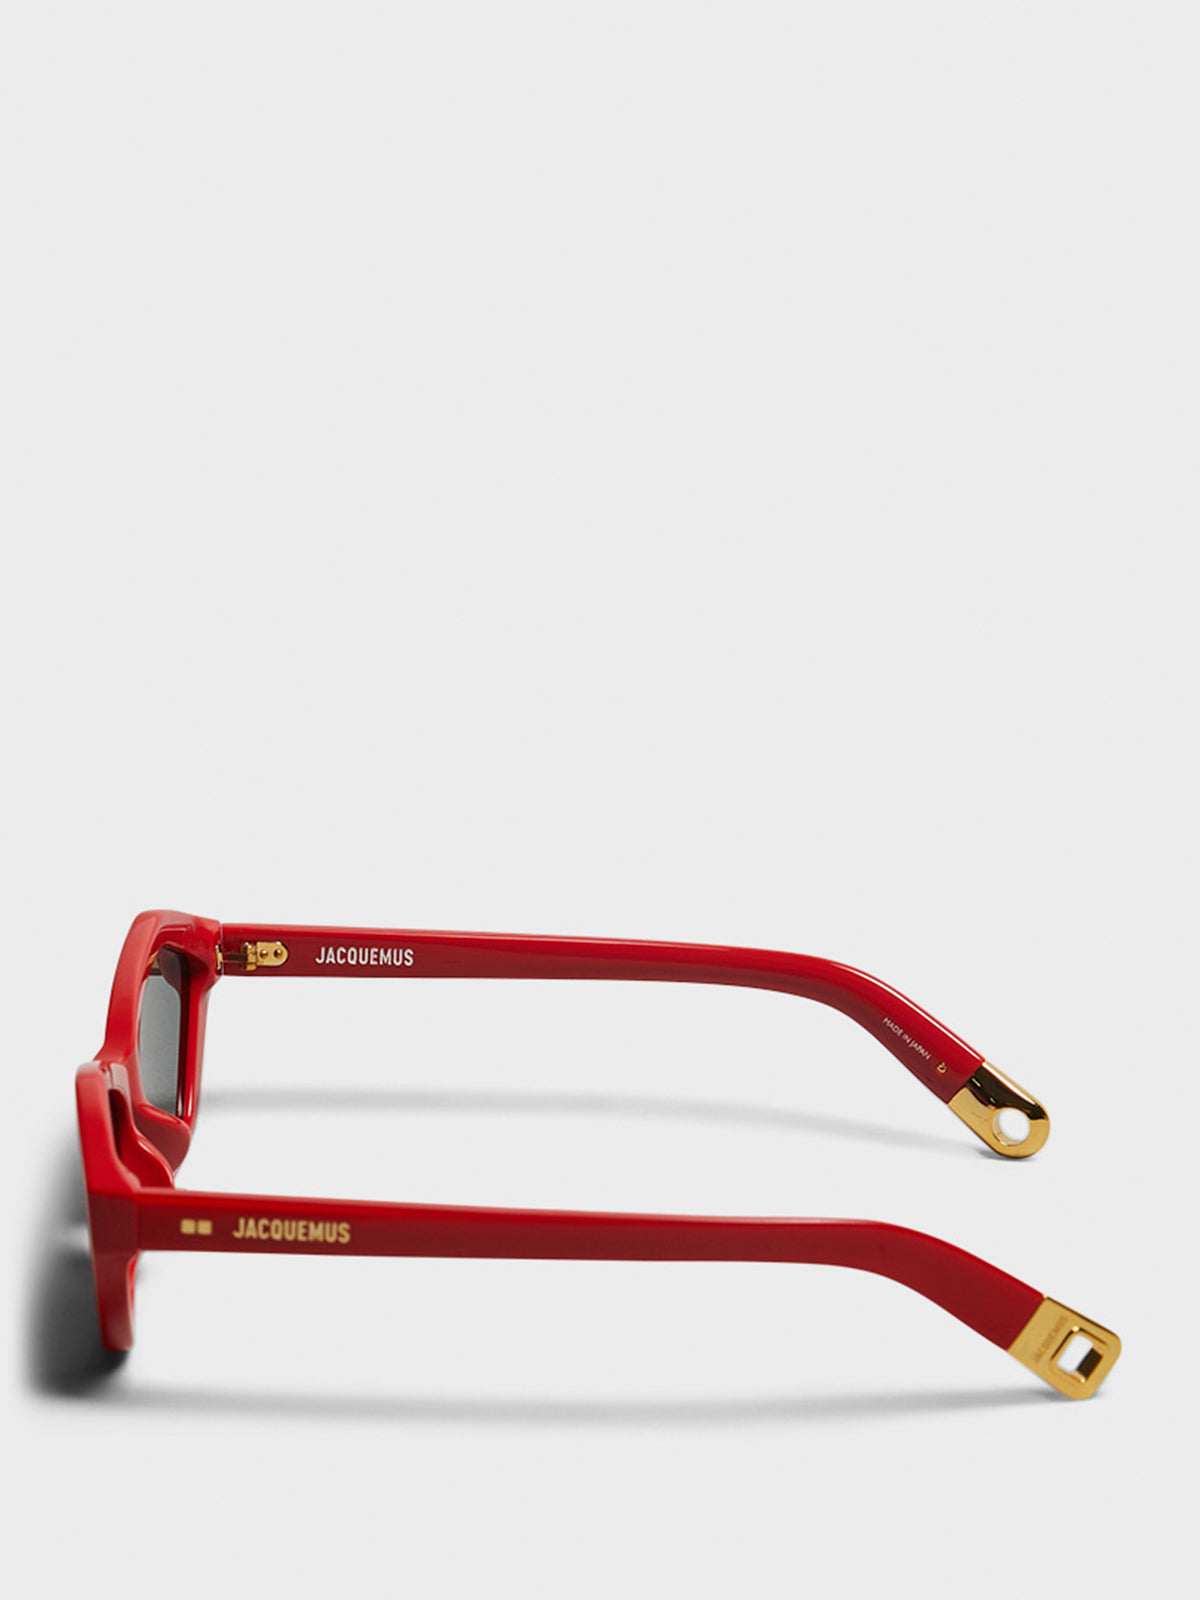 Bambino Sunglasses in Red, Yellow Gold and Grey